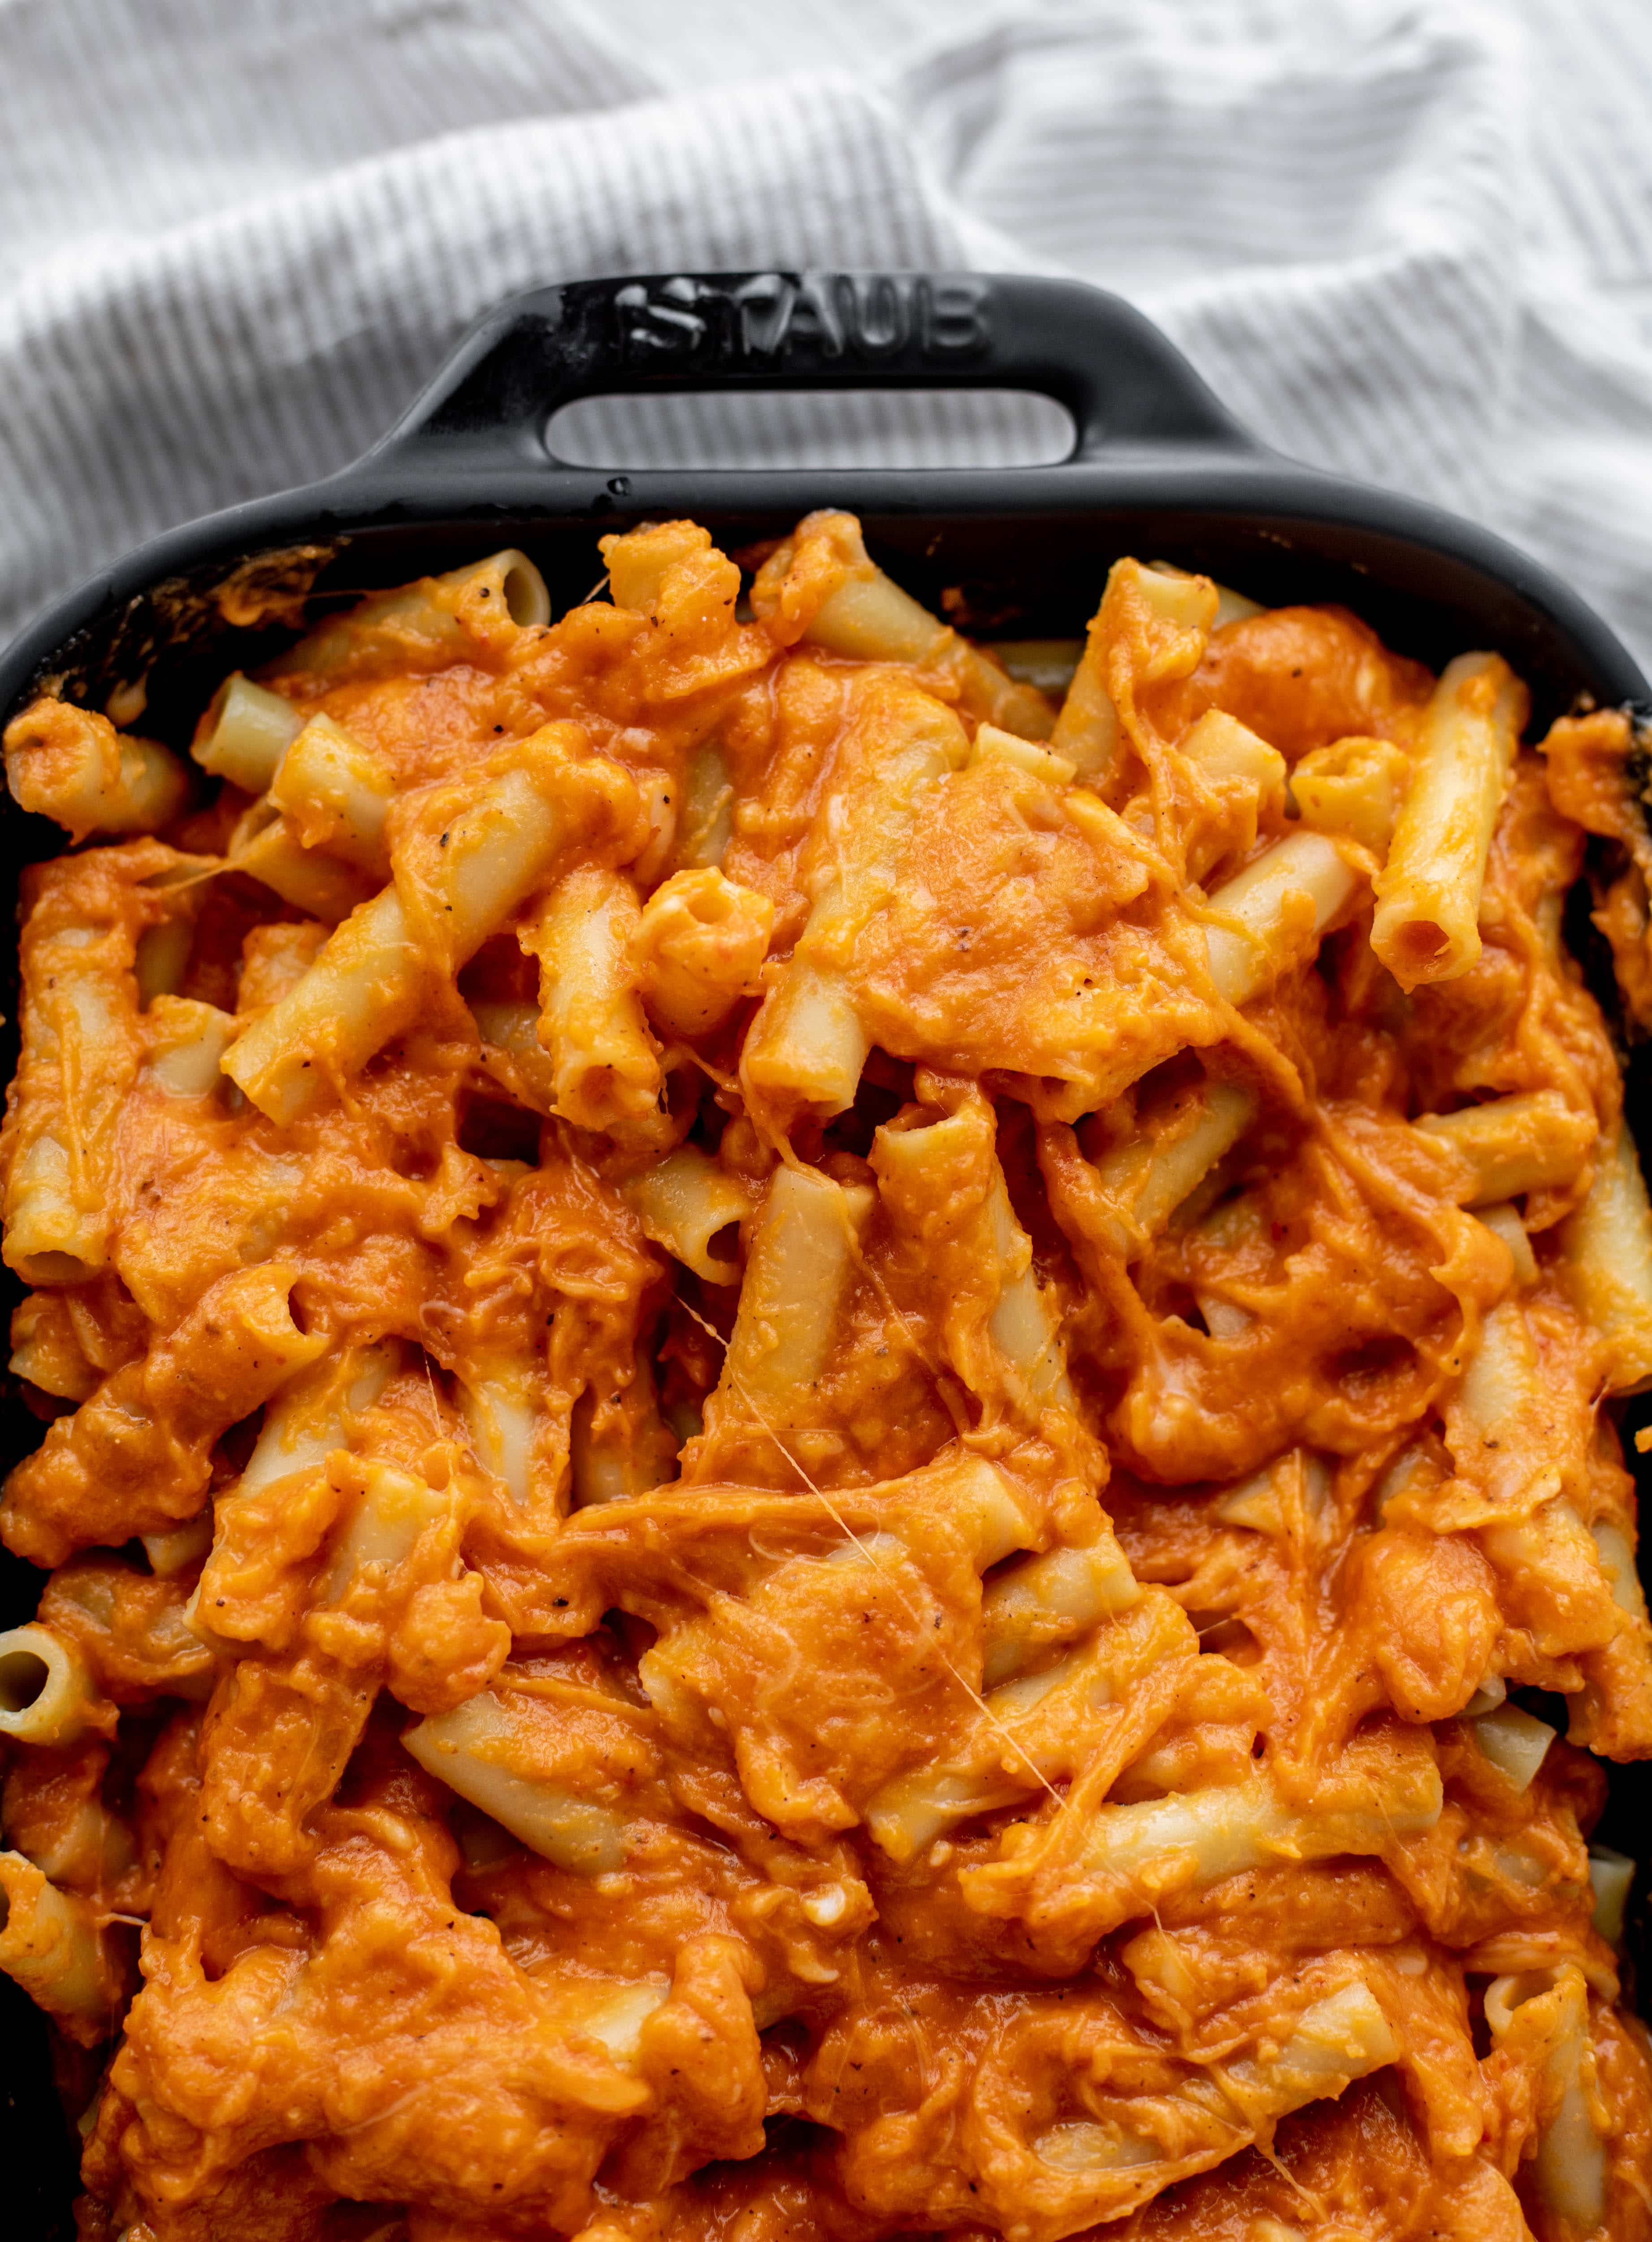 Butternut squash baked ziti is the ultimate comfort food! Squash, fire roasted tomatoes, parmesan and mozzarella make the best sauce ever.